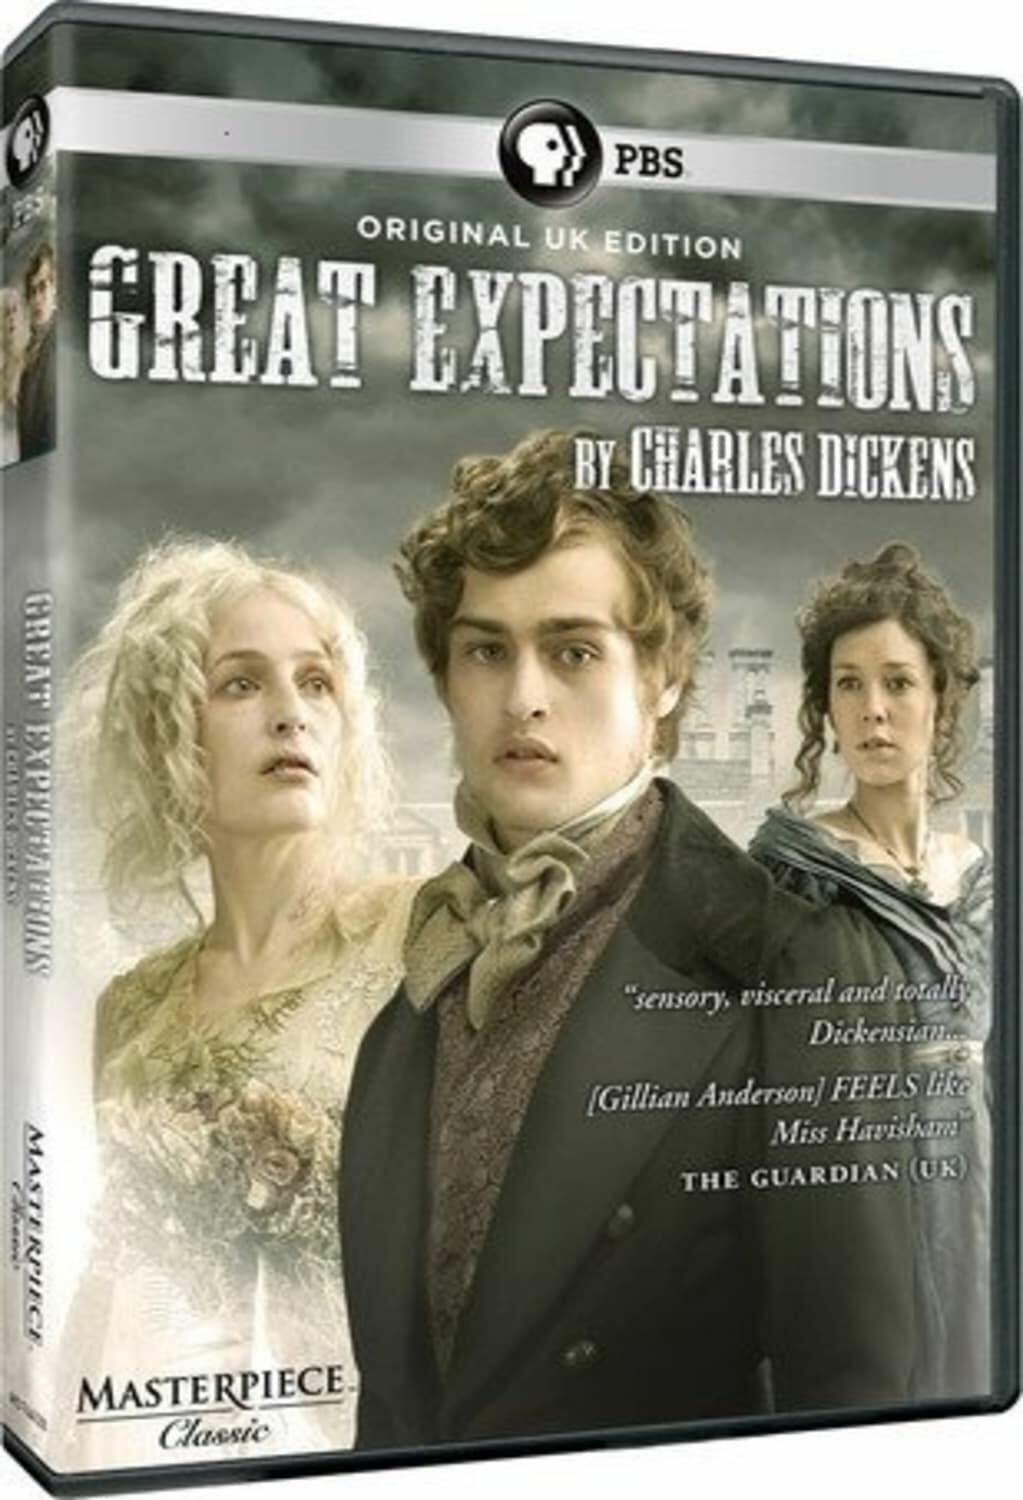 Masterpiece – Great Expectations (DVD) (U.K. Edition)